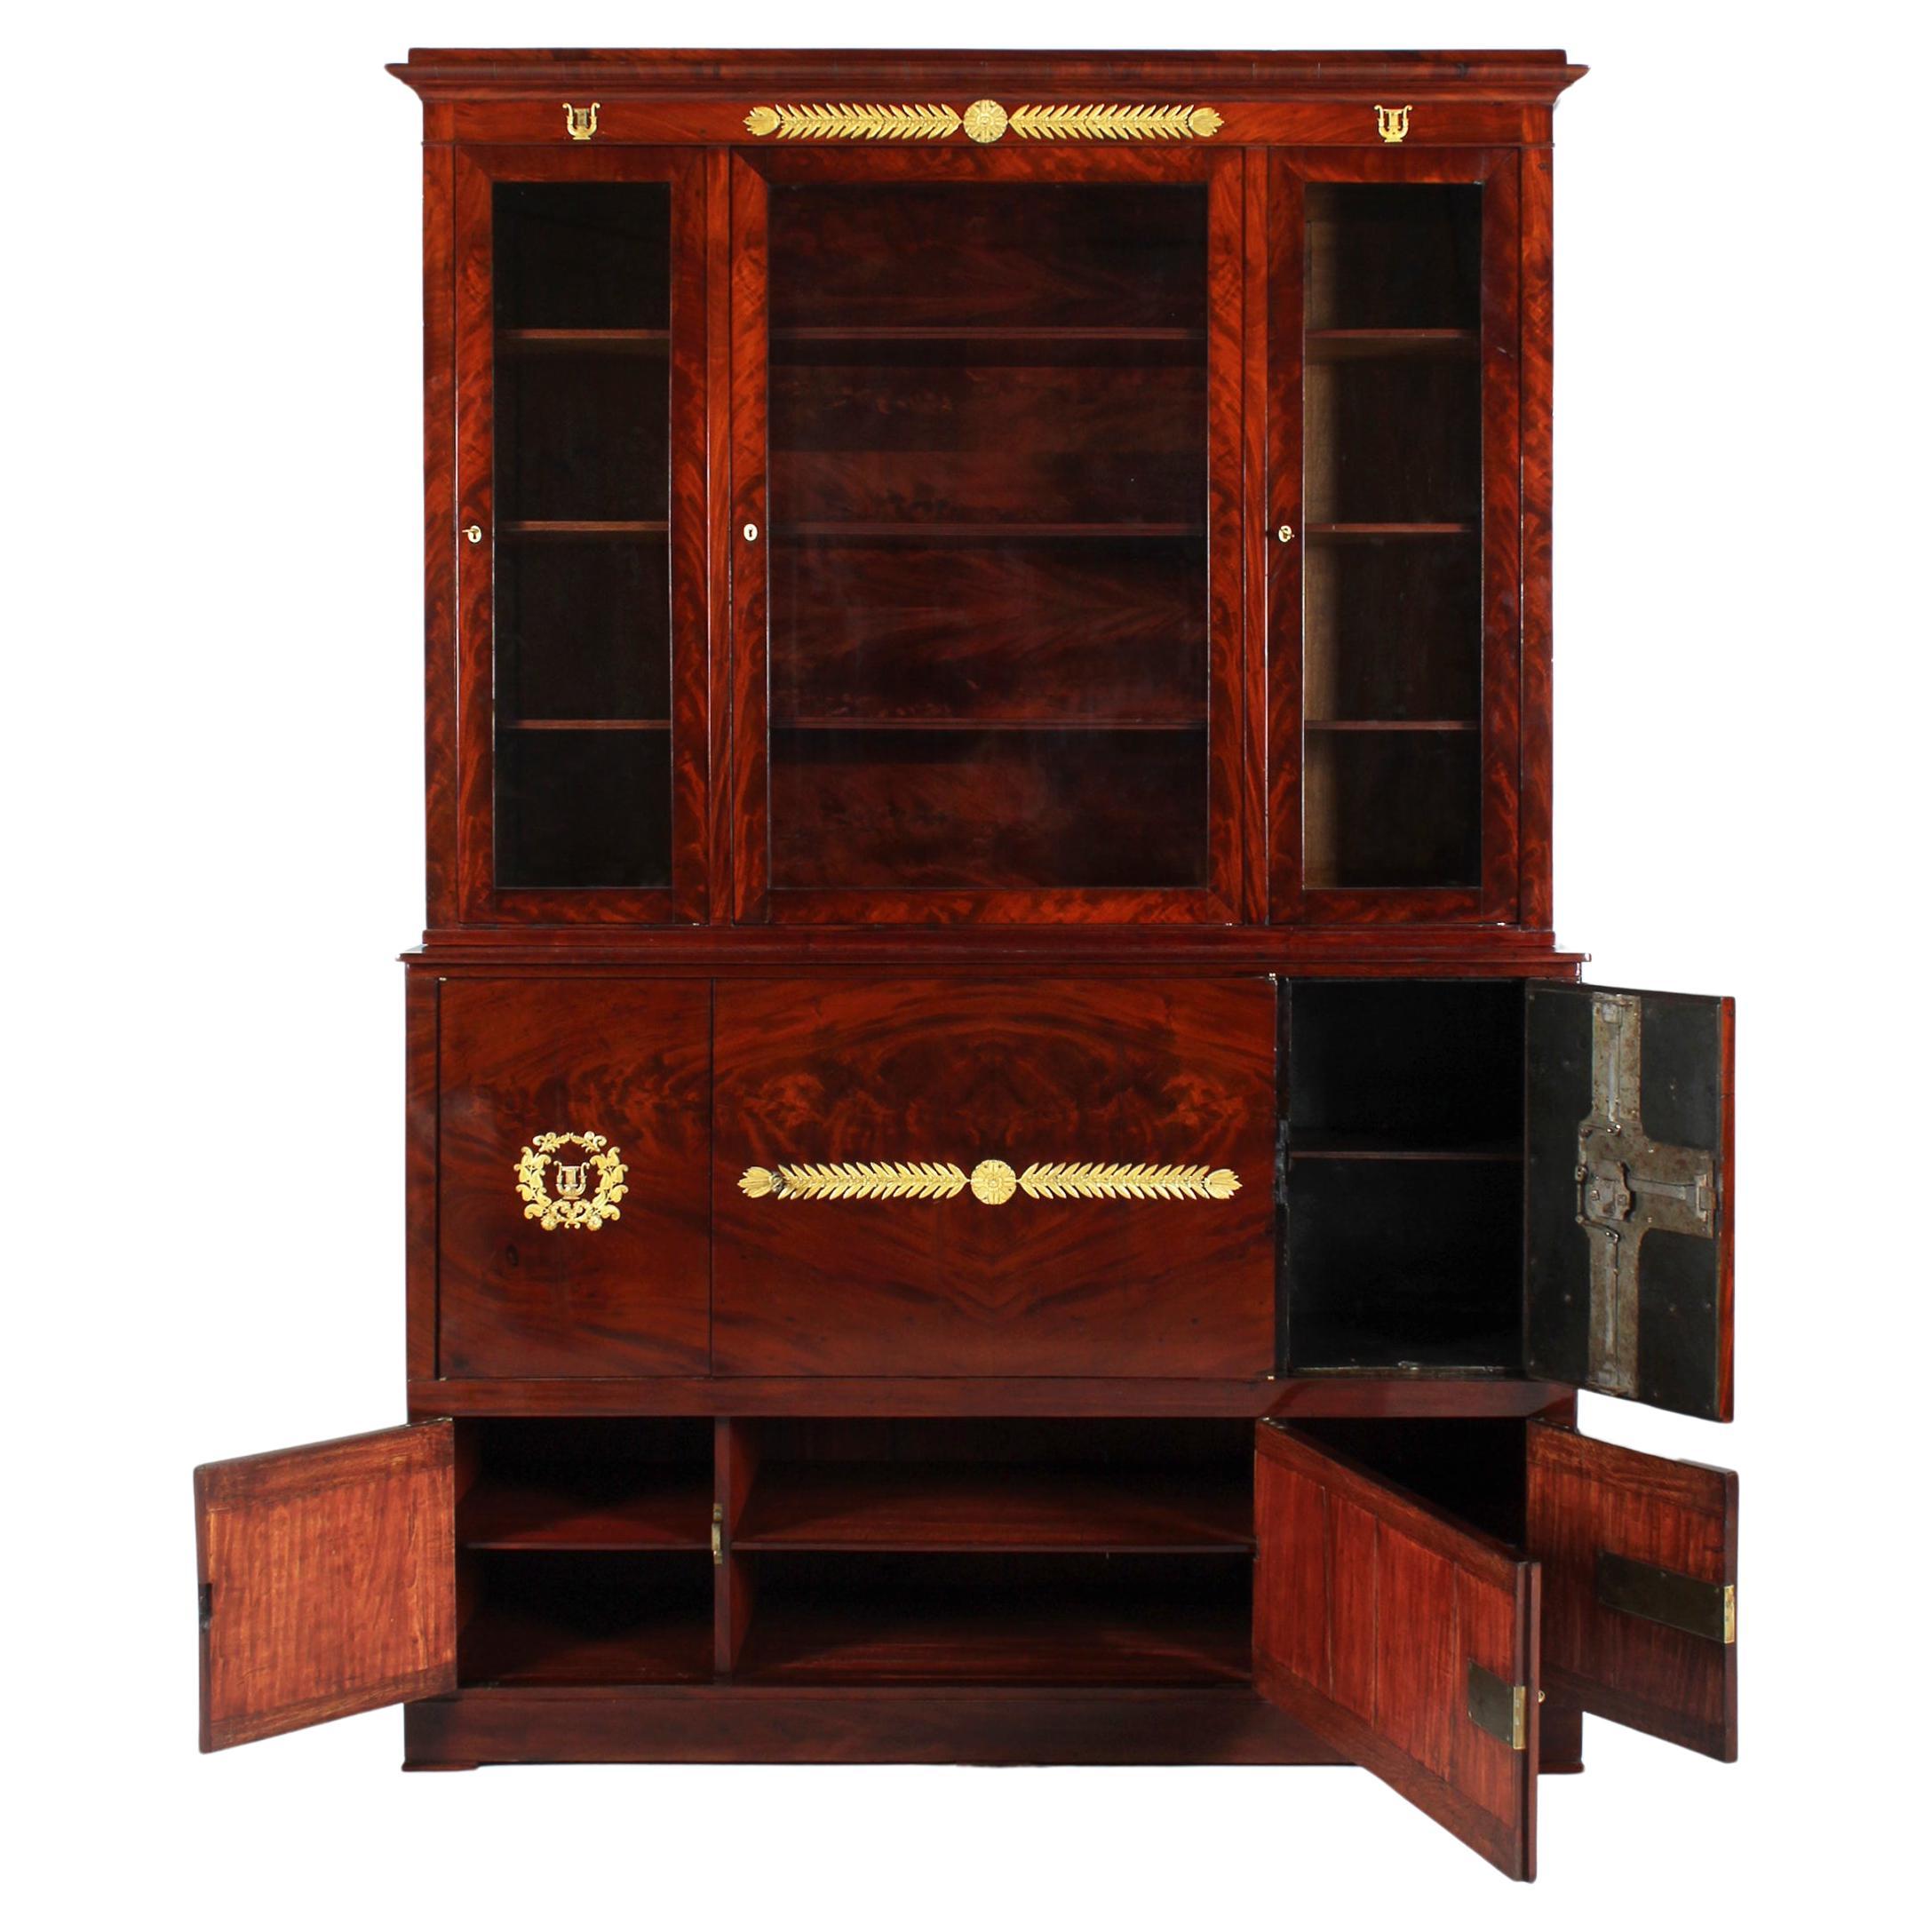 Early 19th Century French Empire Bookcase with Safe-Deposit-Box, Mahogany